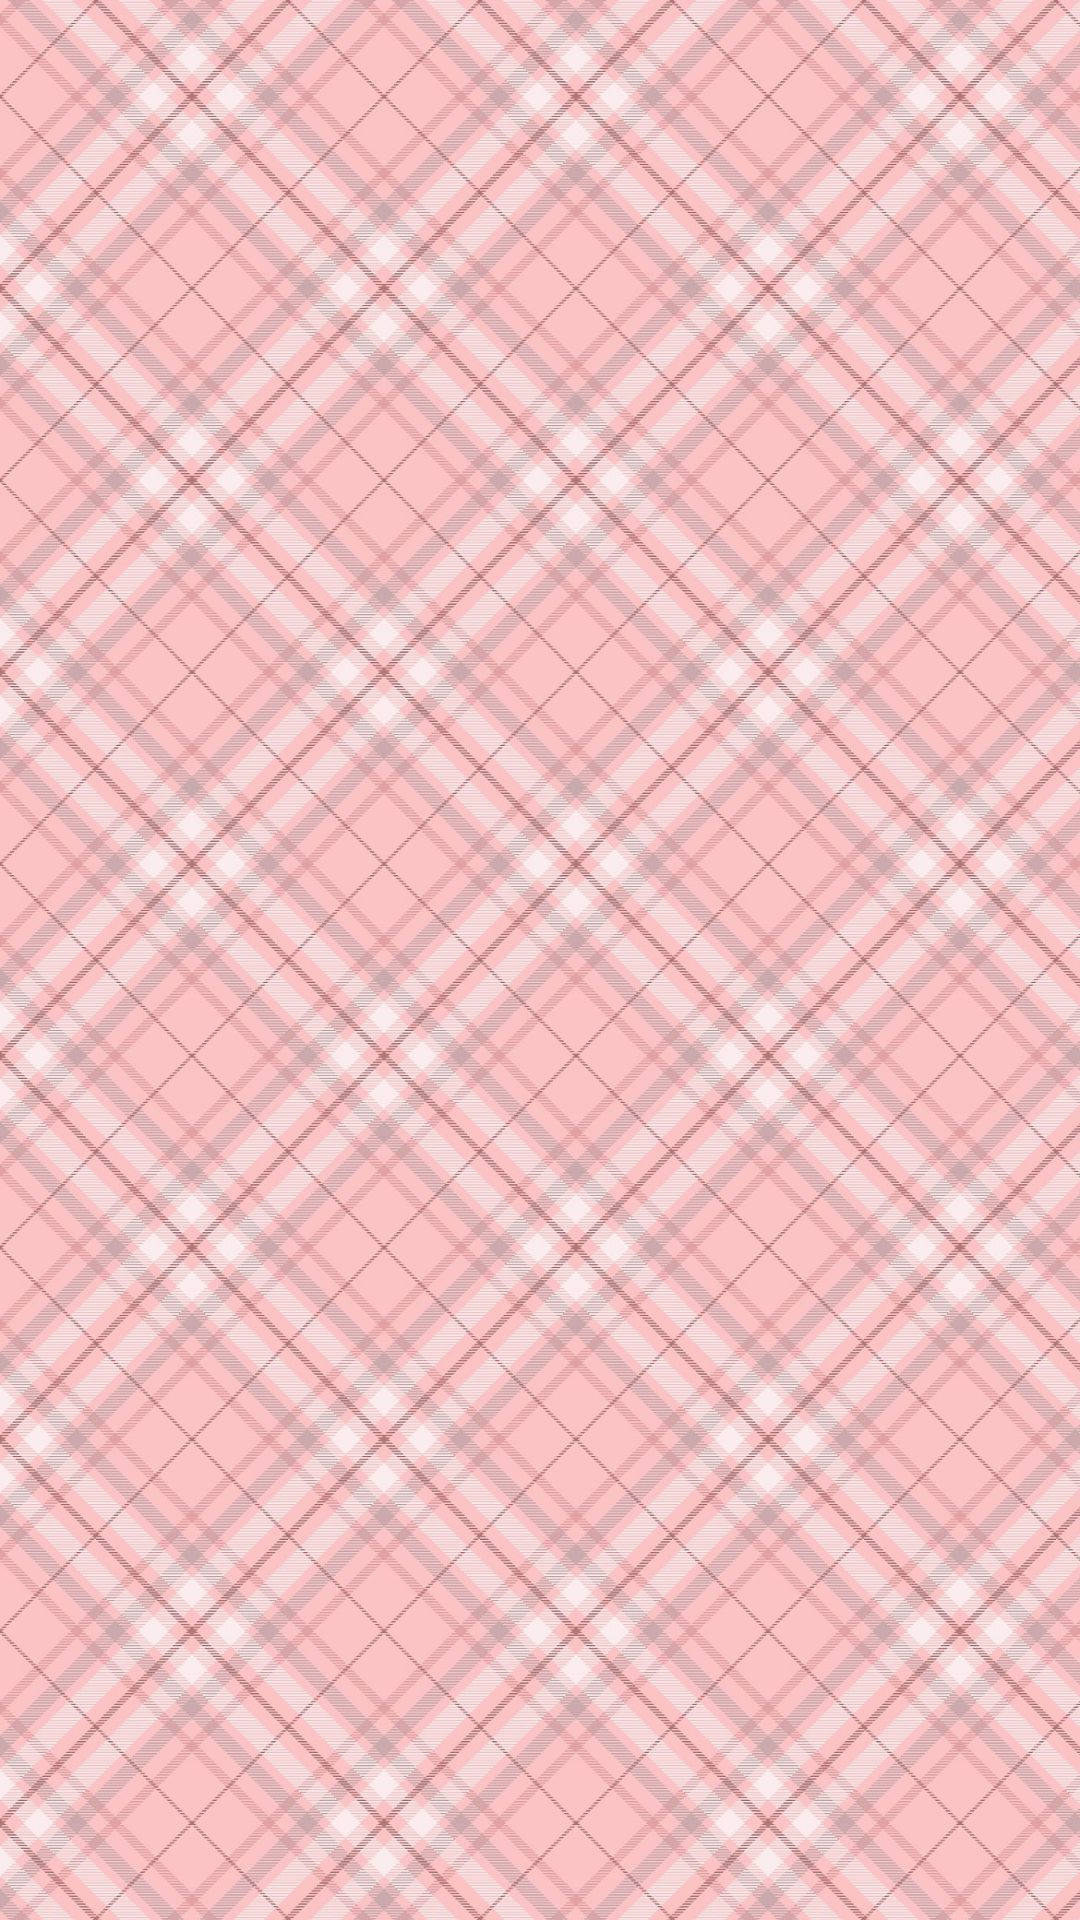 Download Aesthetic Pink Checkered Wallpaper 